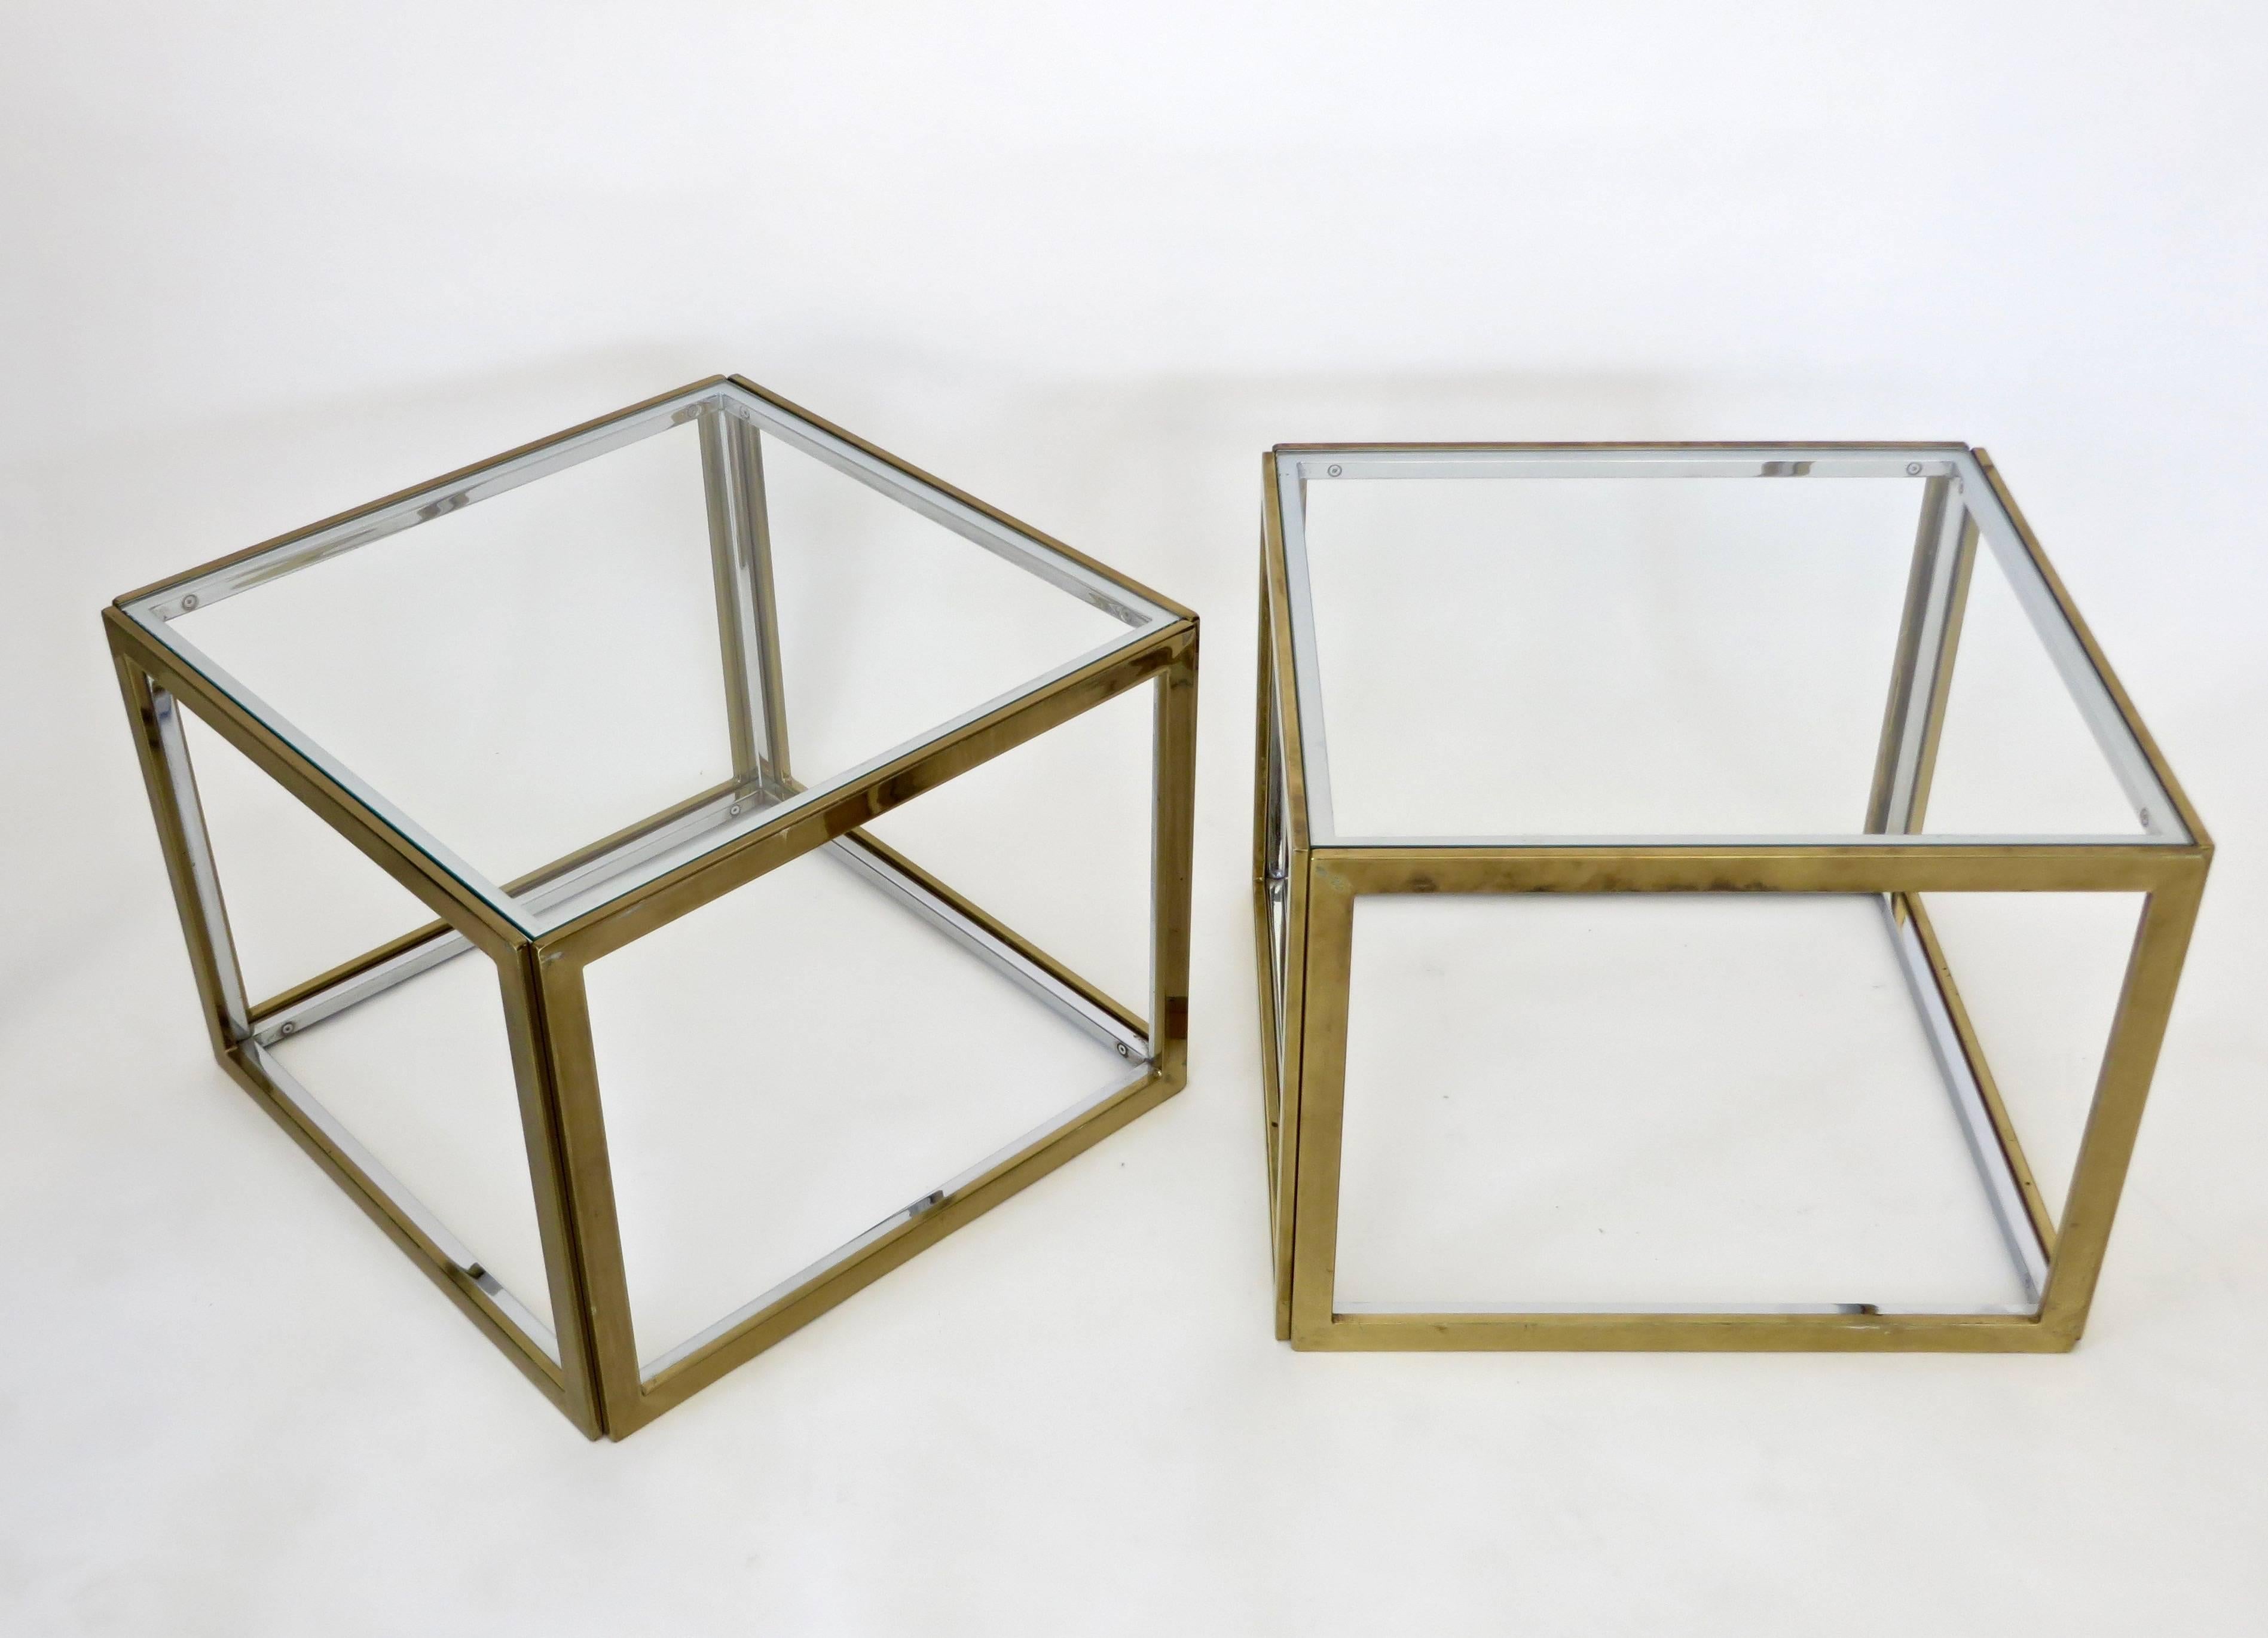 A pair of French square brass and chrome end or side tables with glass top by Maison Charles et Fils. Can easily be put together to use as a coffee table.
This listing is for one pair. 
Each square is 20